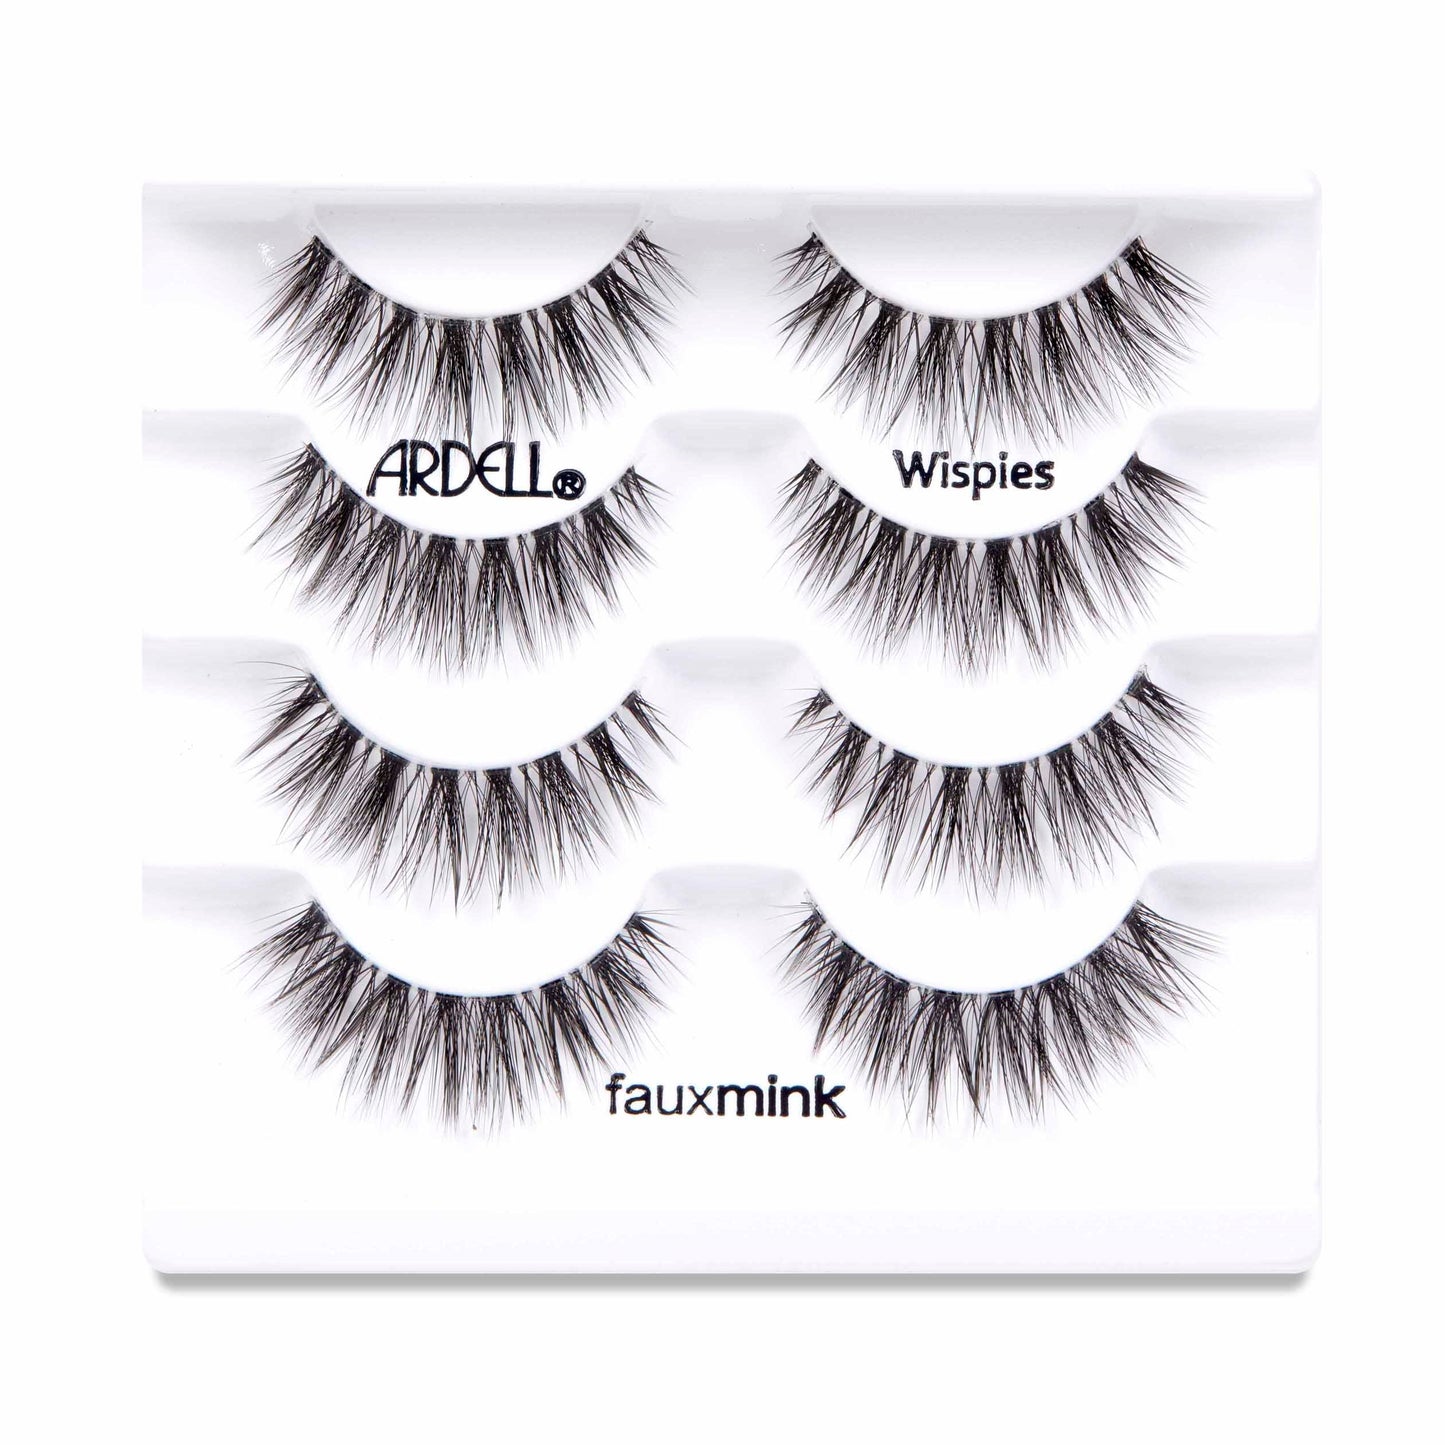 Ardell Faux Mink Wispies False Lashes, Pack of 4